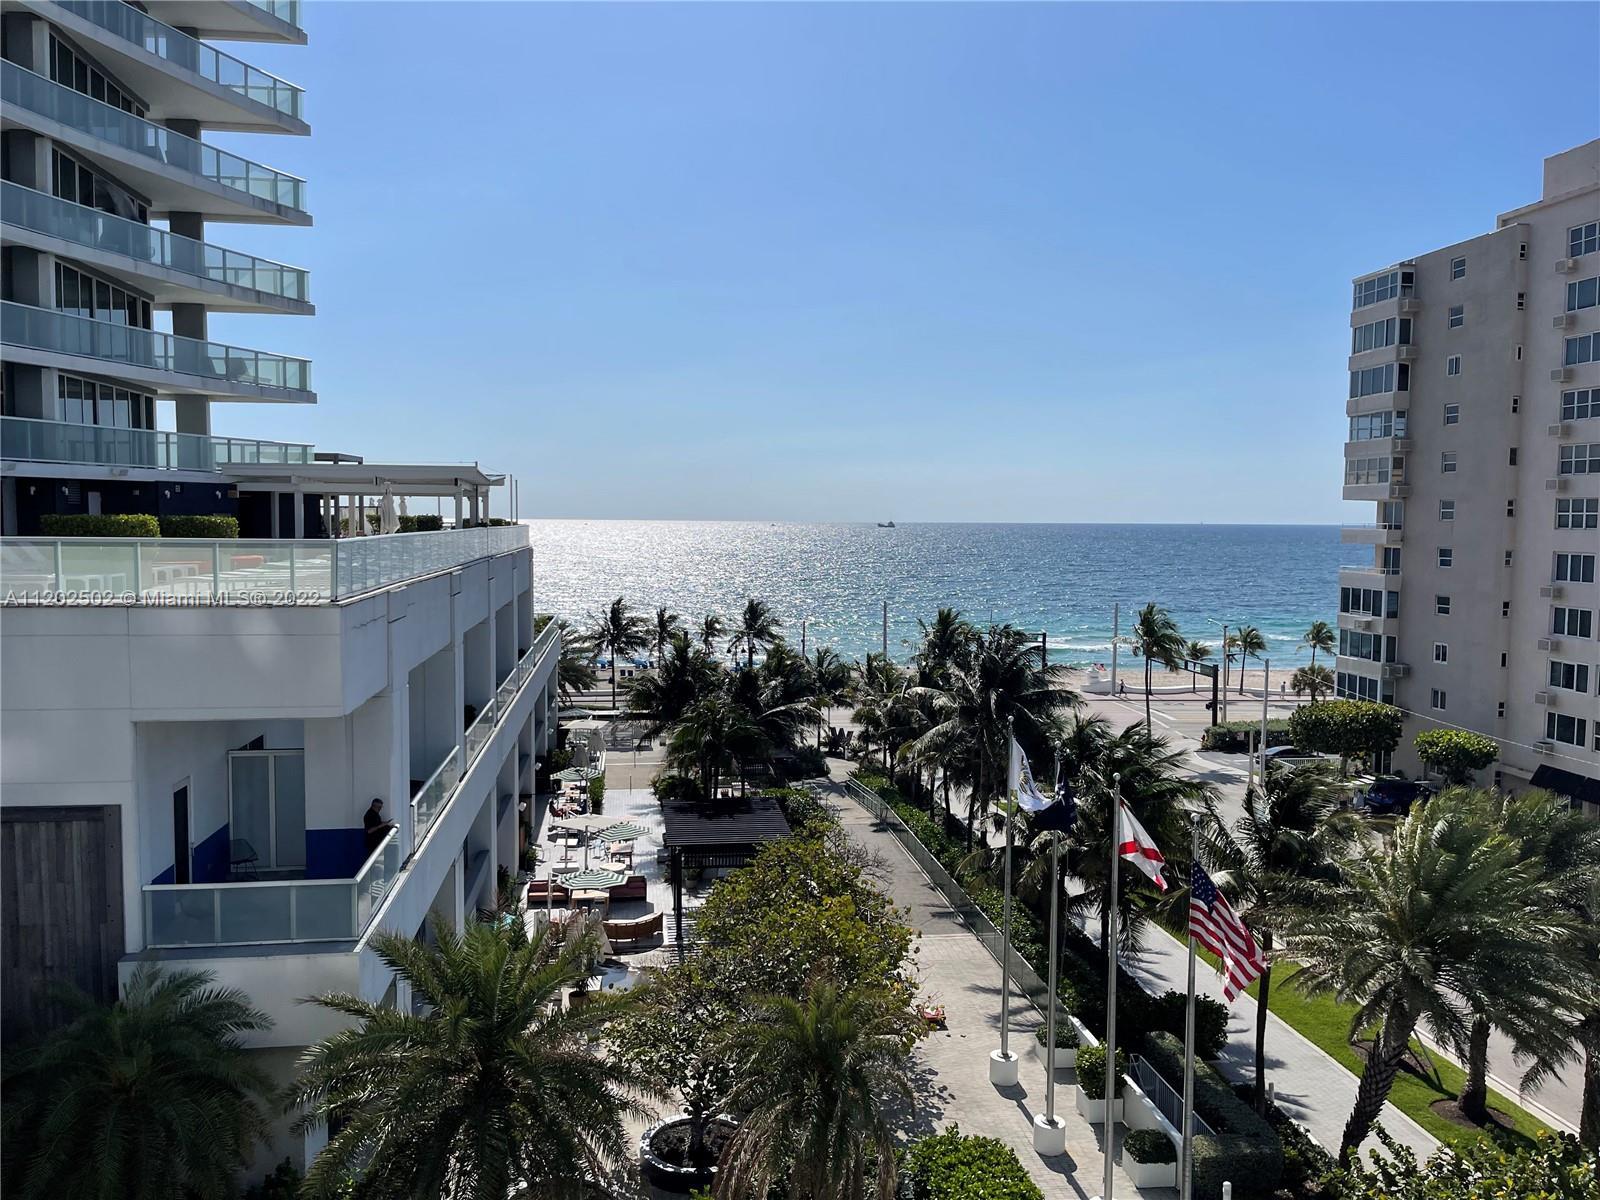 AMAZING OPPORTUNITY AT W RESIDENCE FORT LAUDERDALE! BEACH LIFE STYLE AT SOUTH FLORIDA WITH 2 BED/2 B